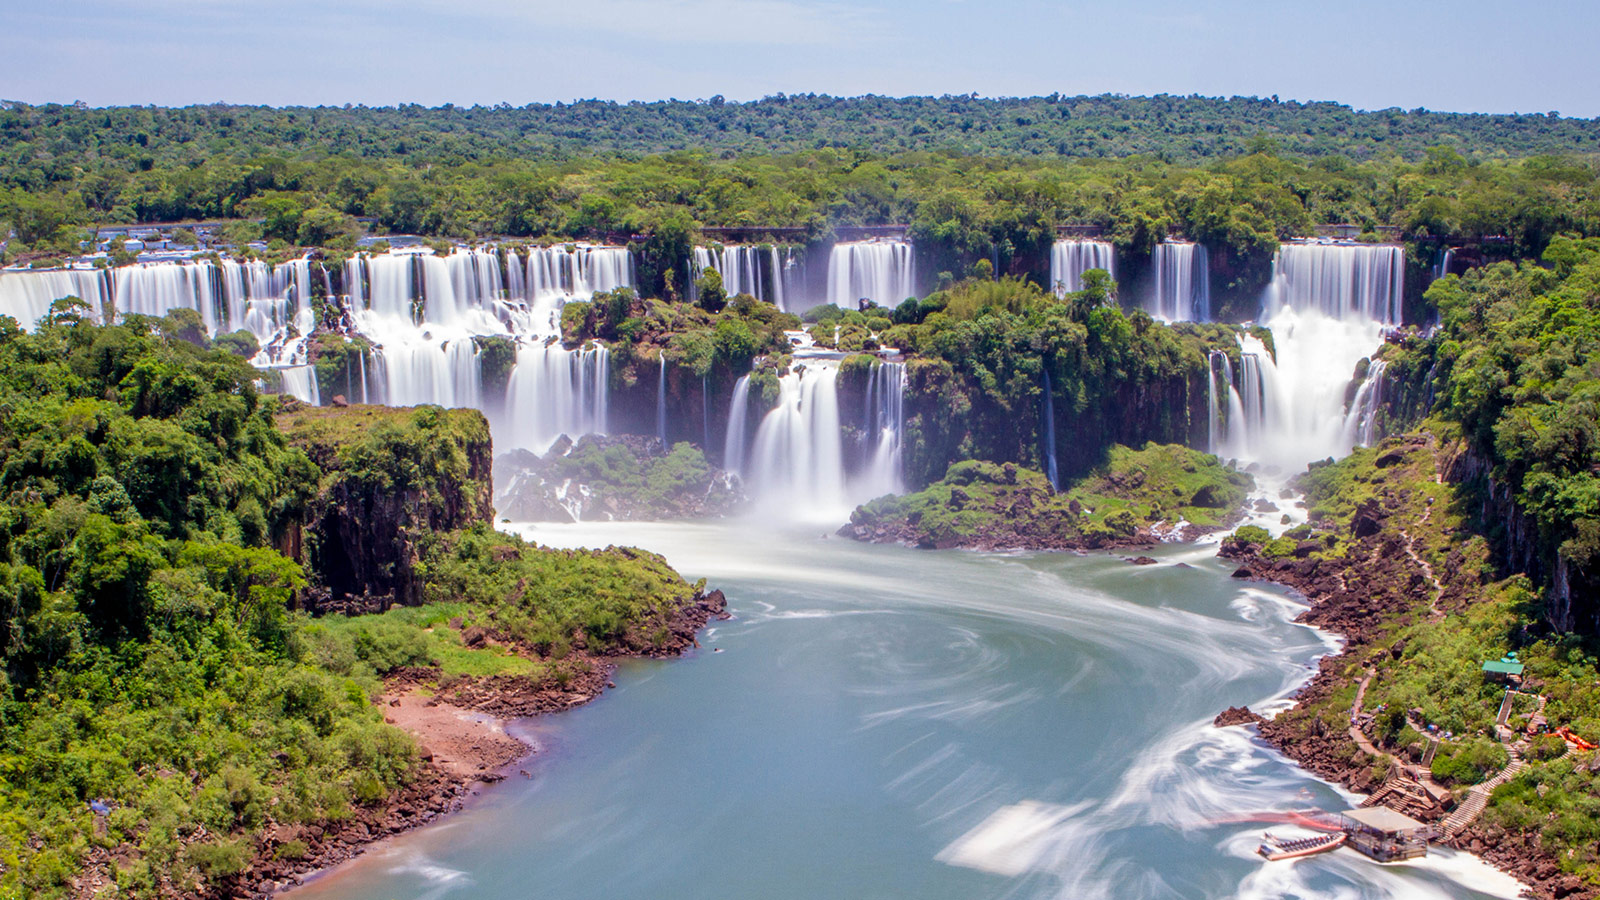 View of Iguazu Falls Brazil from the beginning of the Cataratas Trail.